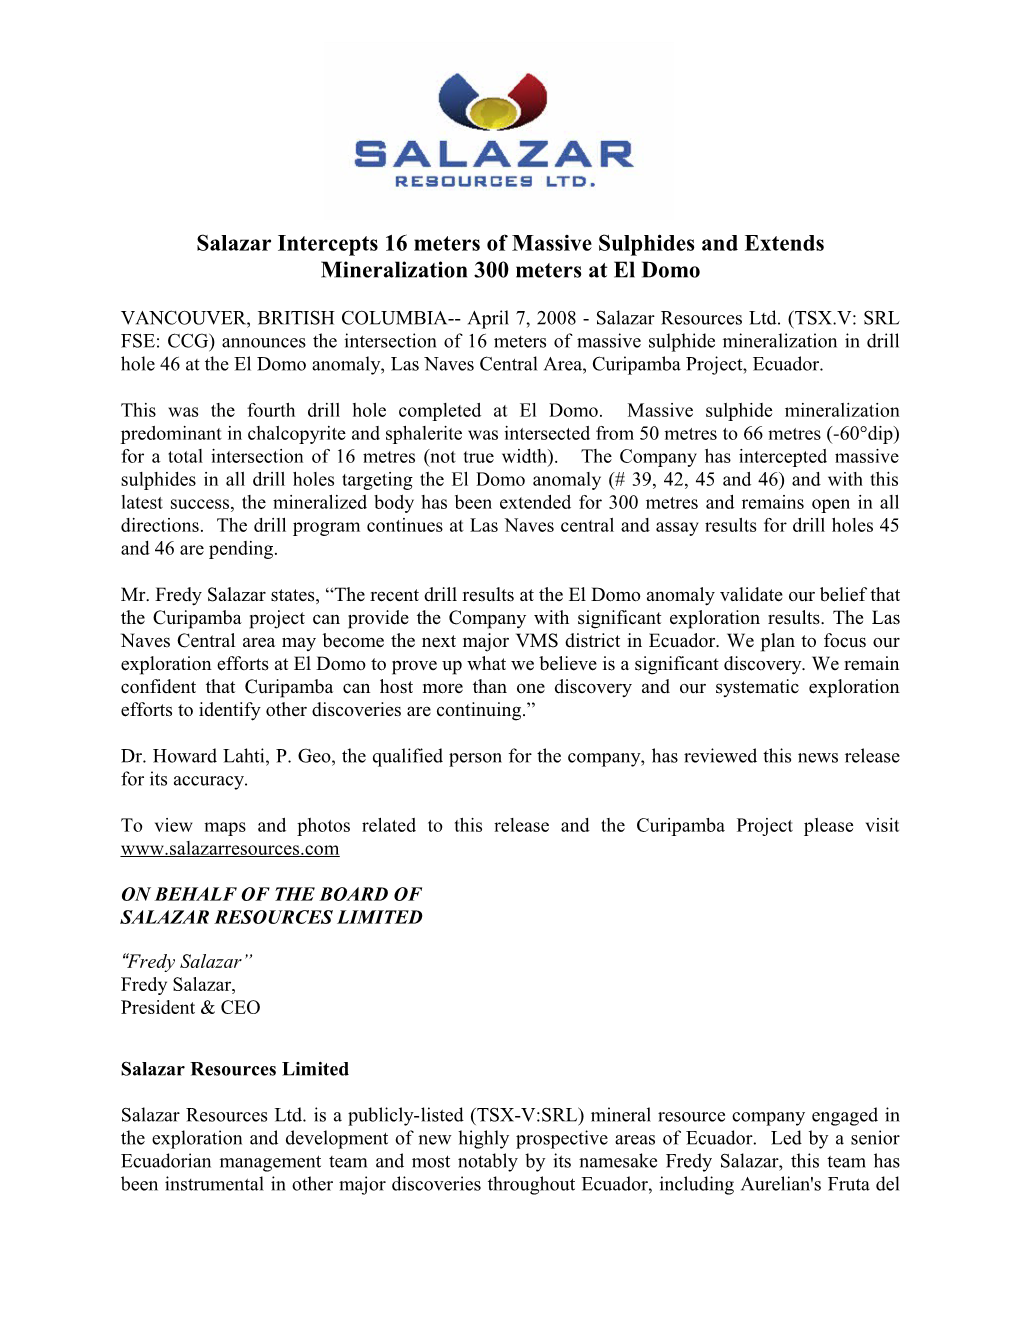 Salazar Intercepts 16 Meters of Massive Sulphides and Extends Mineralization 300 Meters